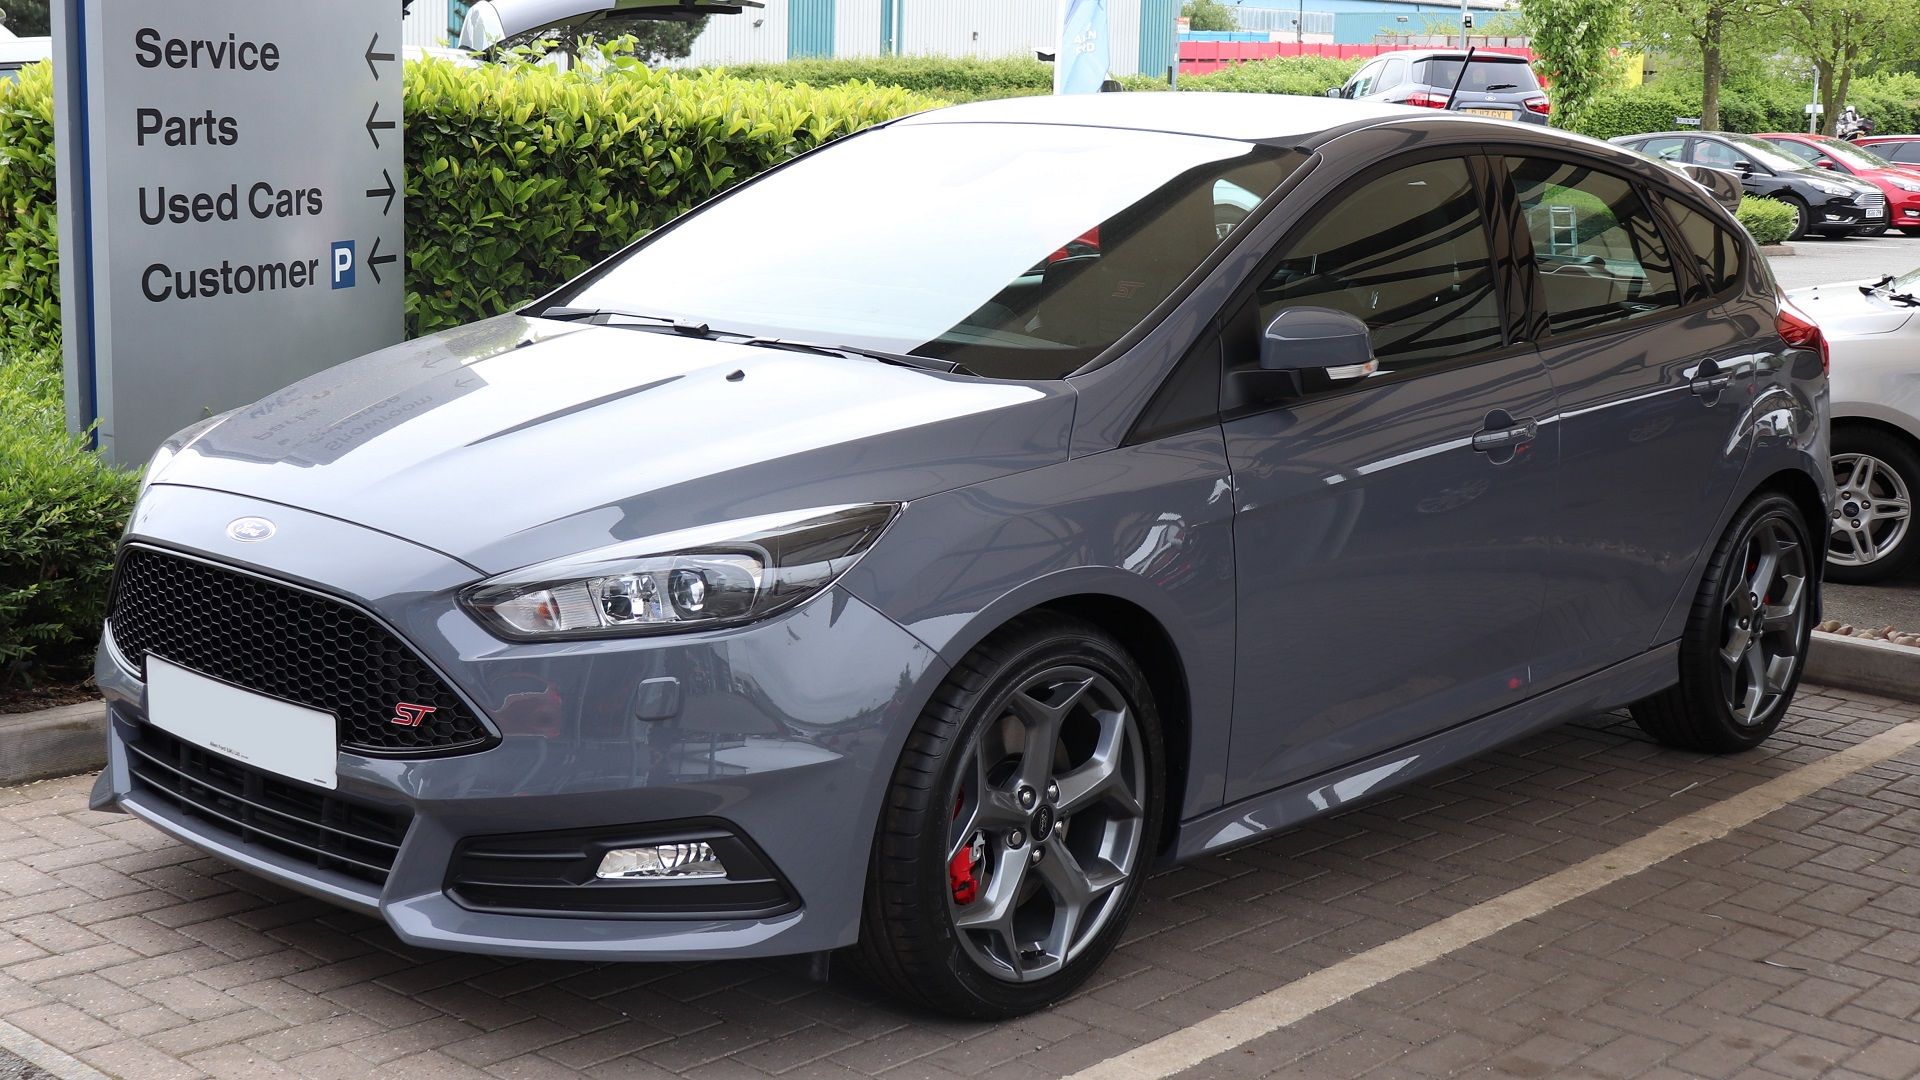 A parked 2018 Ford Focus ST